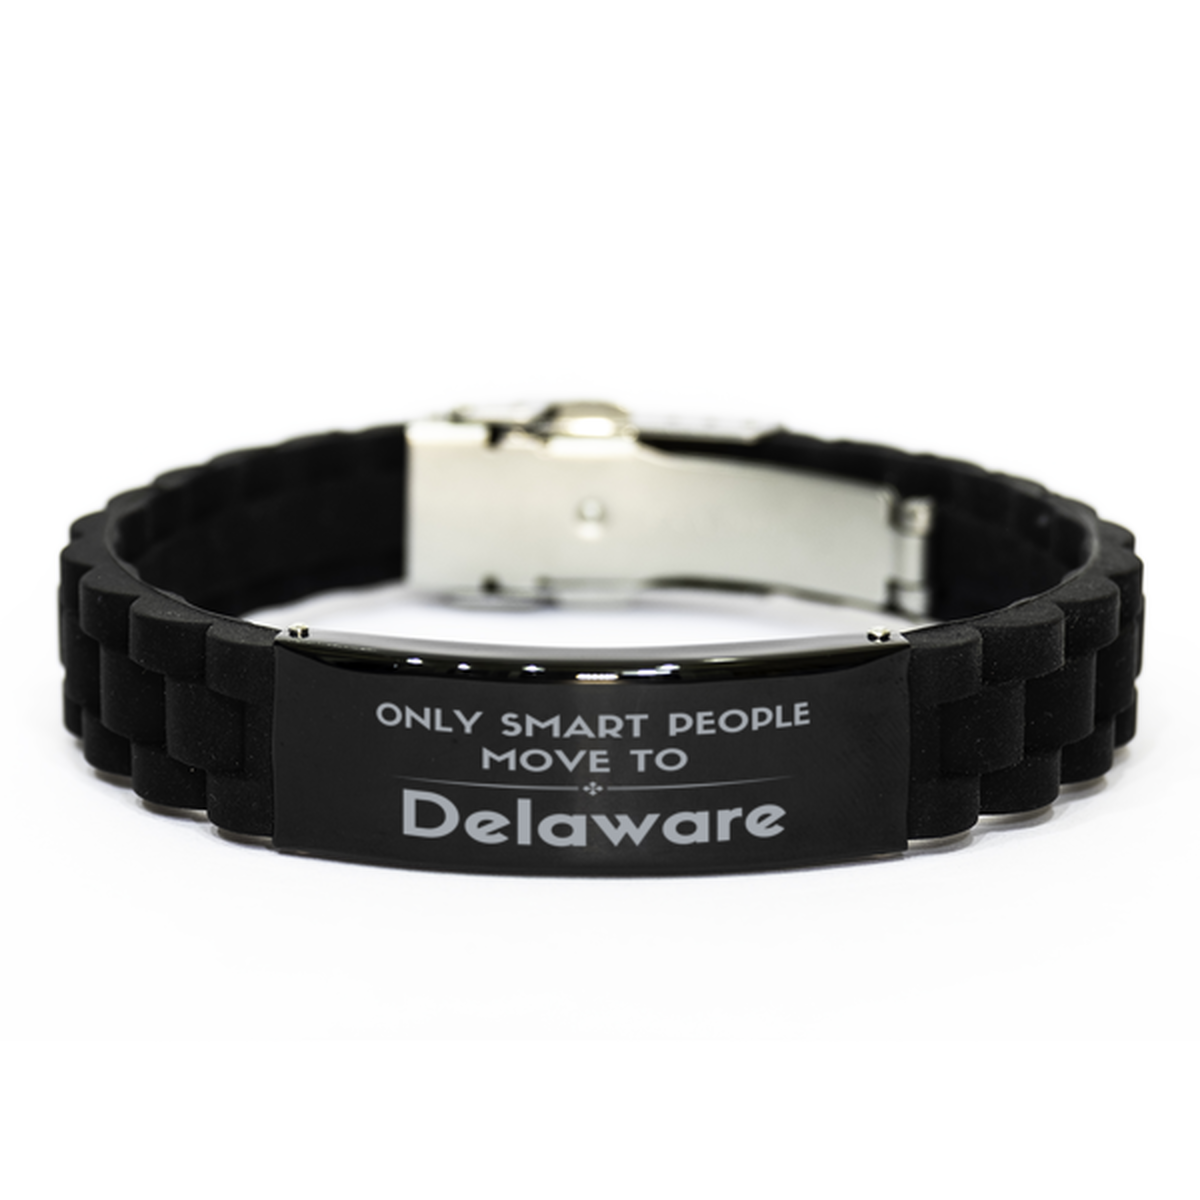 Only smart people move to Delaware Black Glidelock Clasp Bracelet, Gag Gifts For Delaware, Move to Delaware Gifts for Friends Coworker Funny Saying Quote